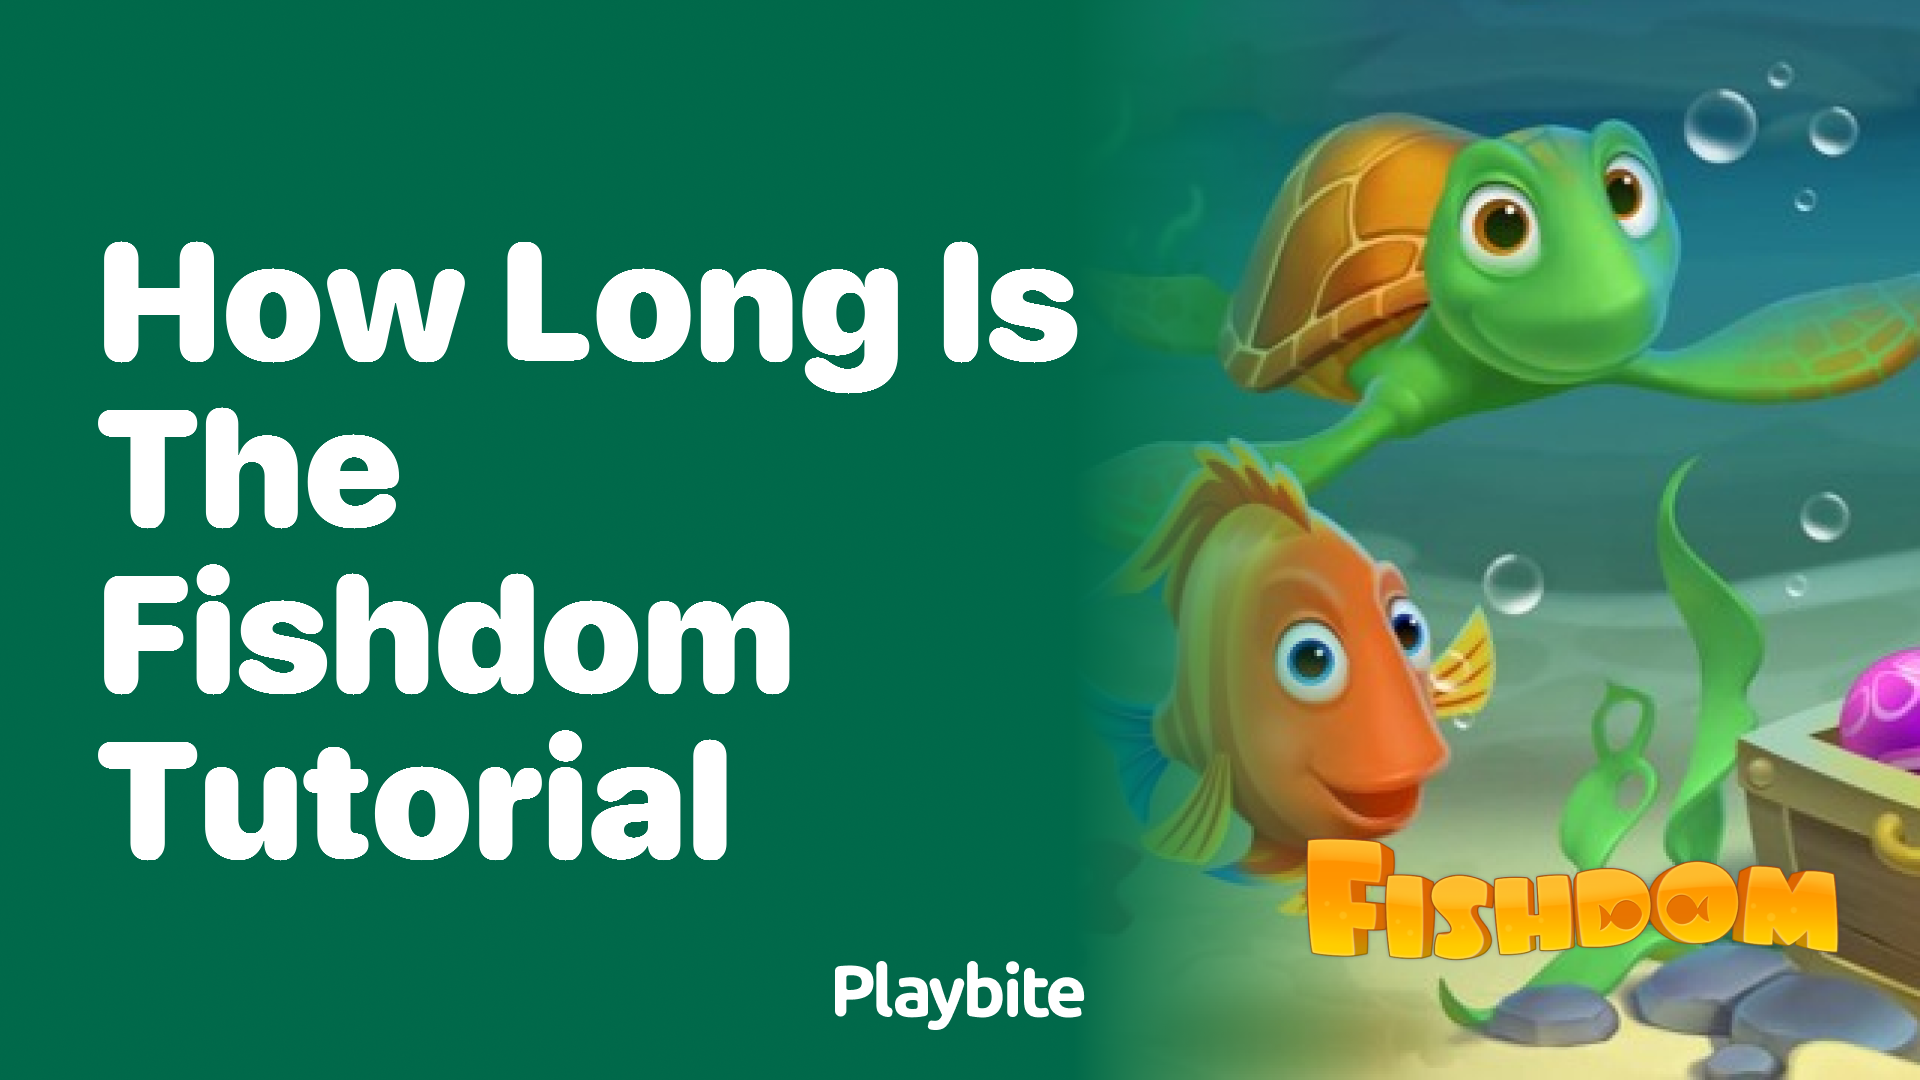 How Long Is the Fishdom Tutorial?